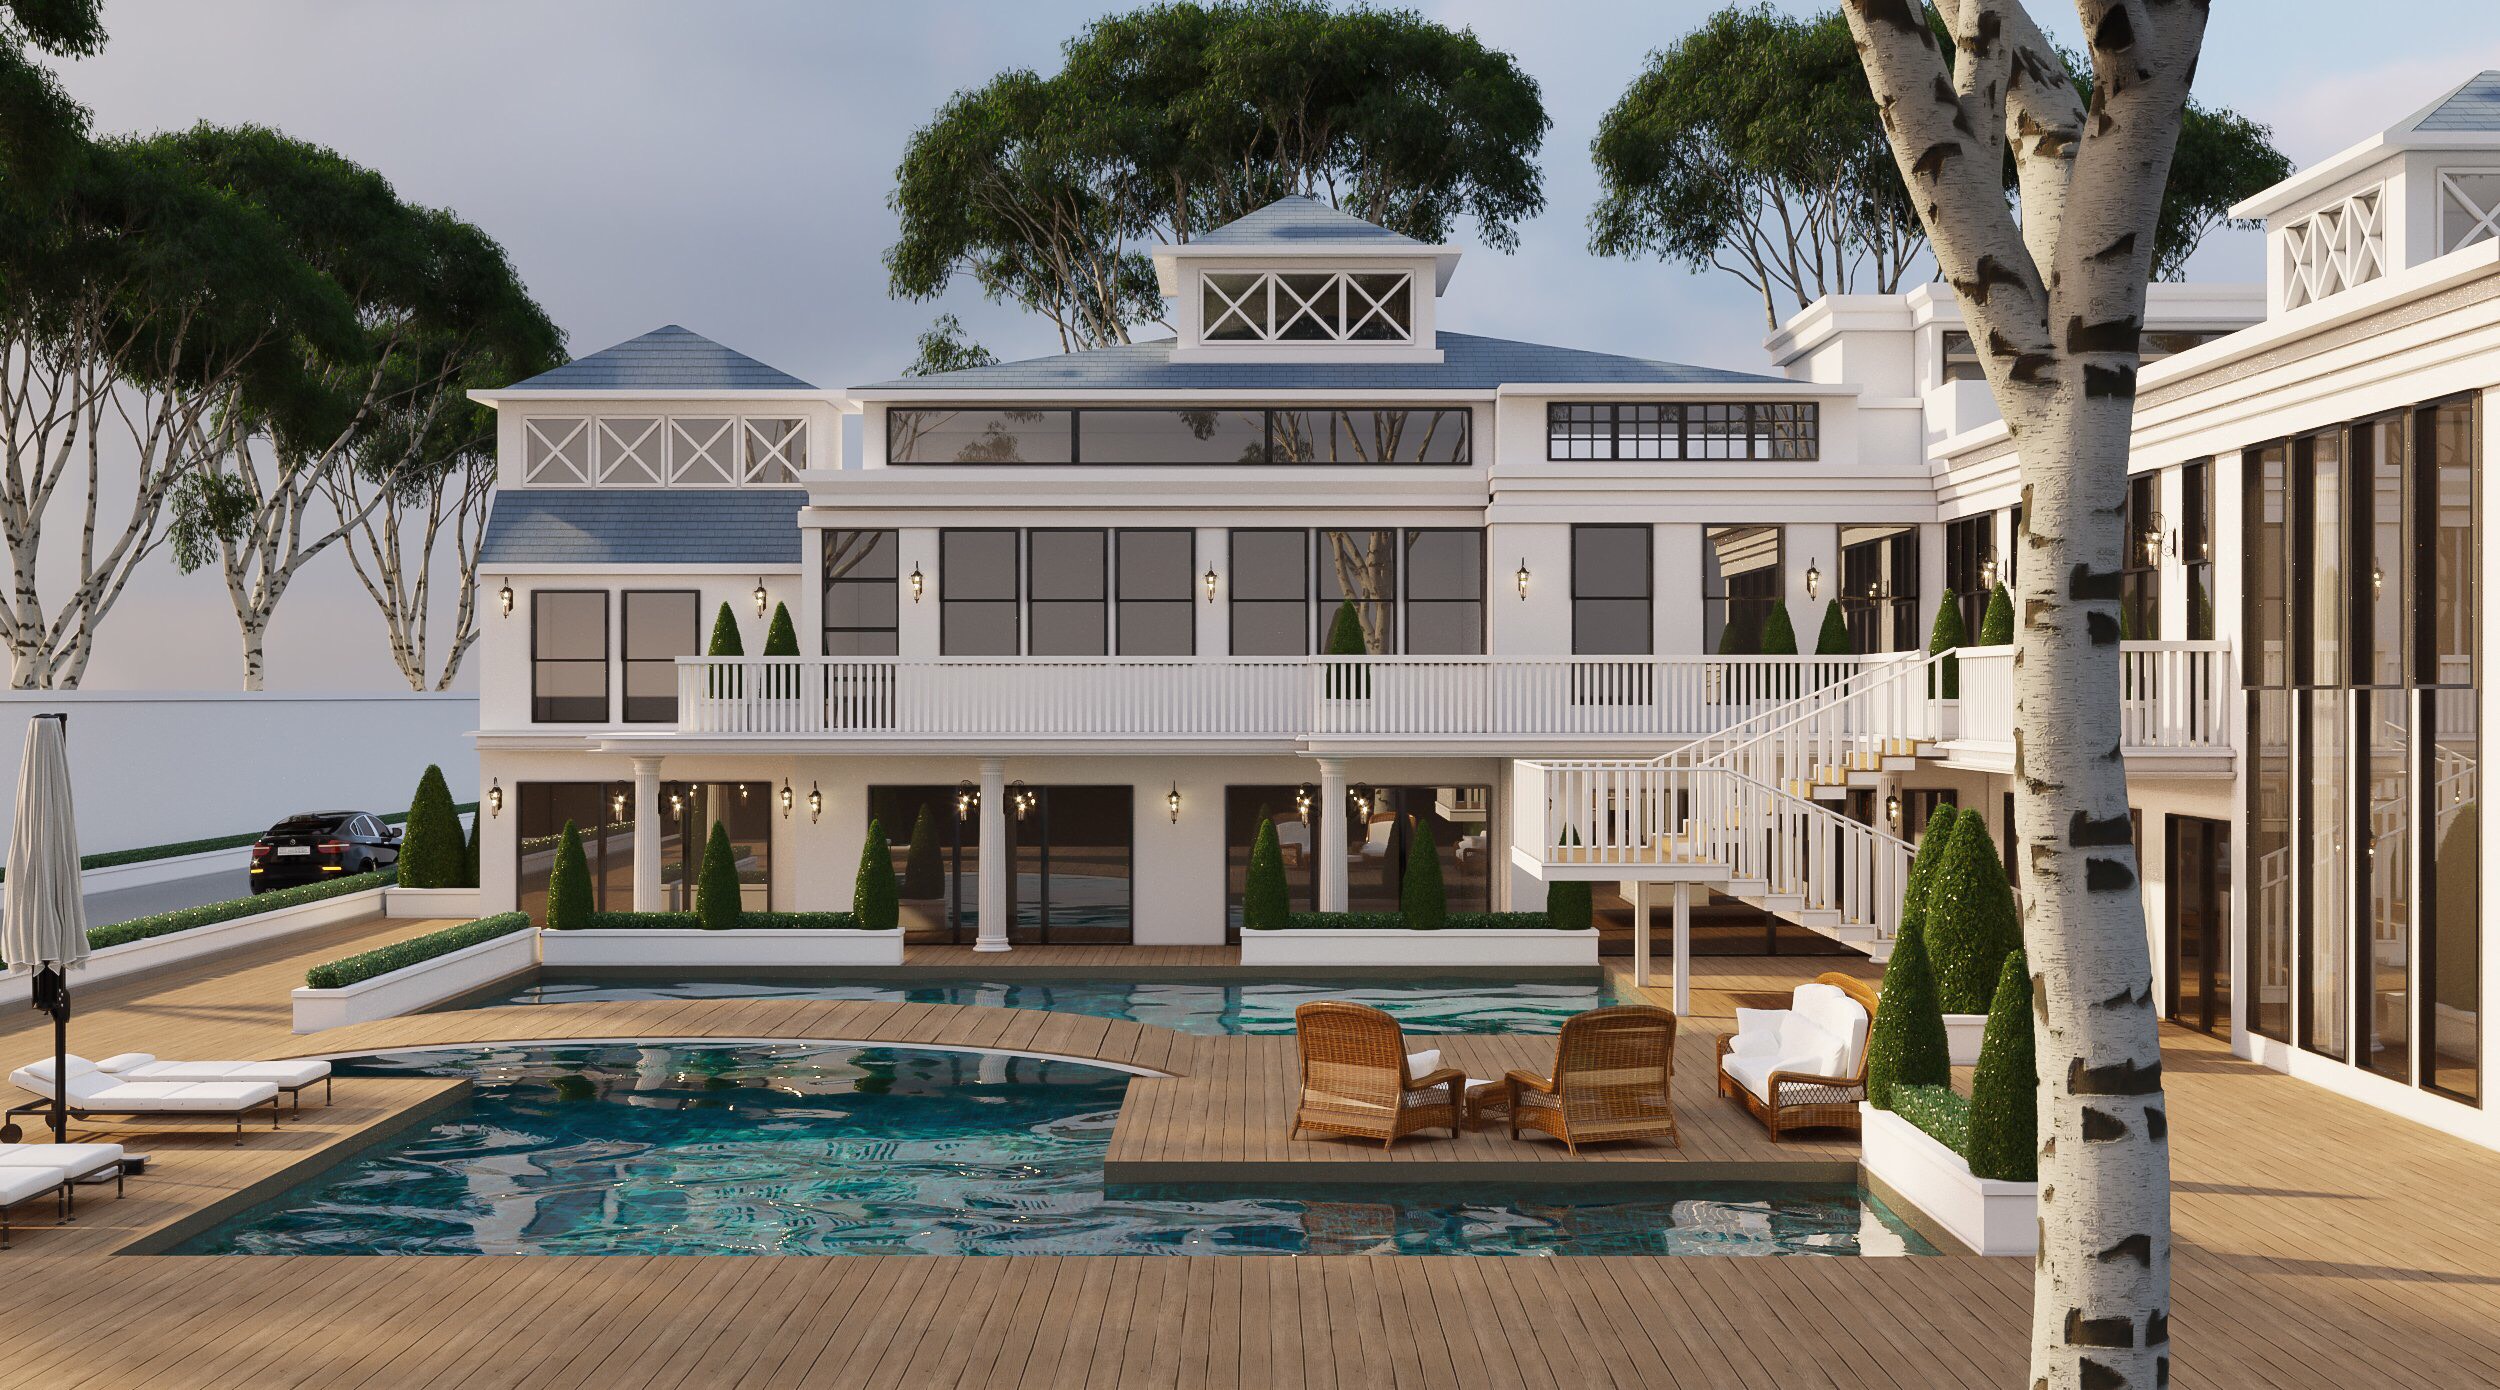 rich result on Google when searching villa rendering